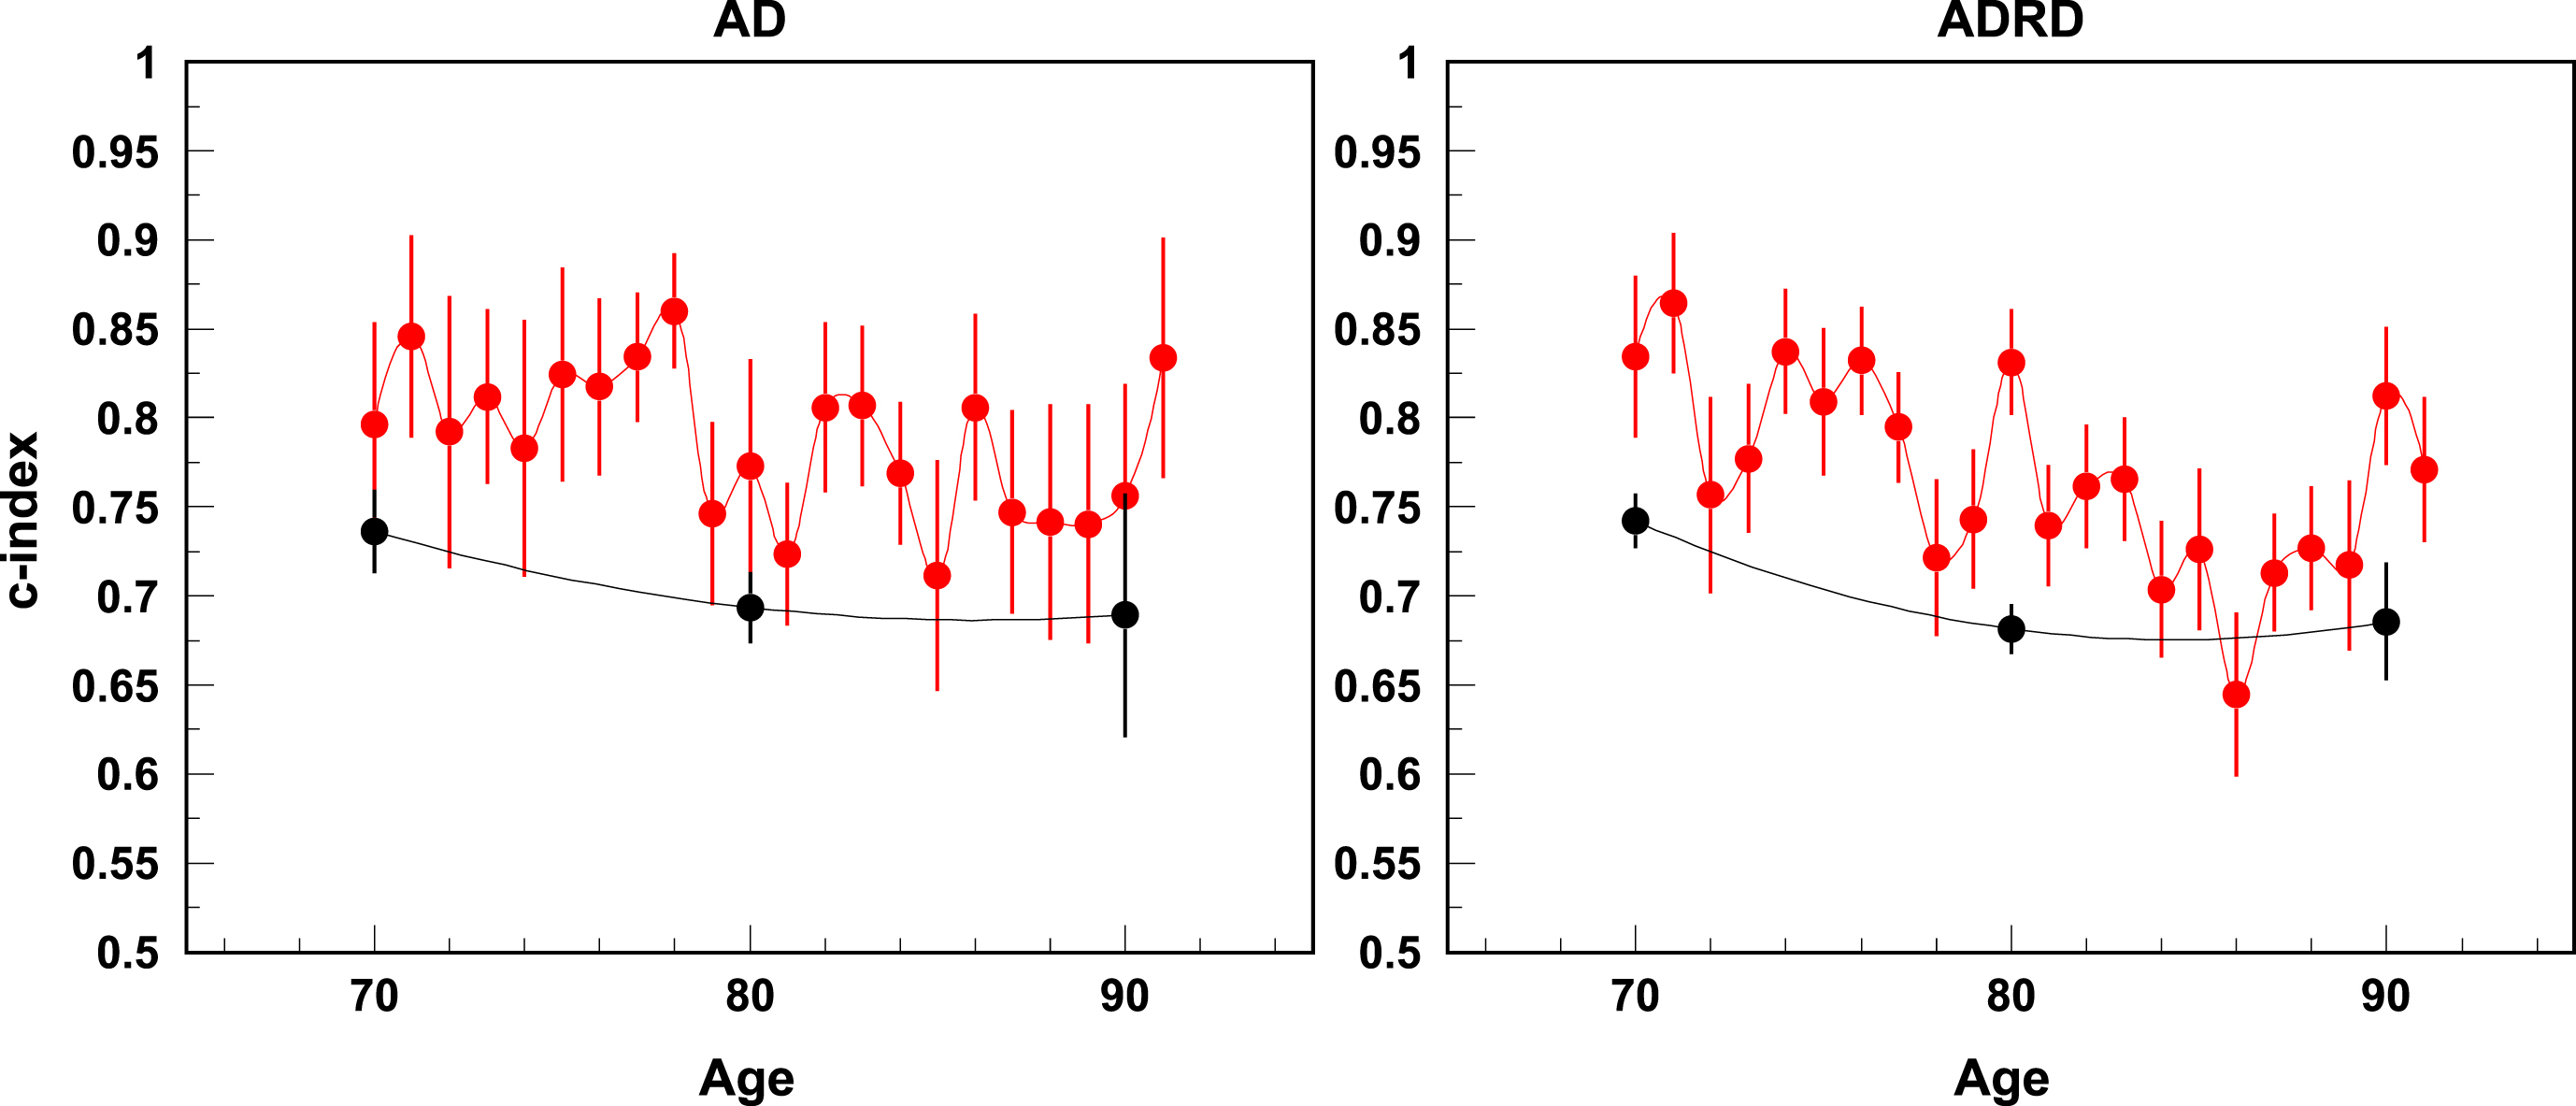 C-index for AD and ADRD risk for one year (red) and ten years of follow-up (black).